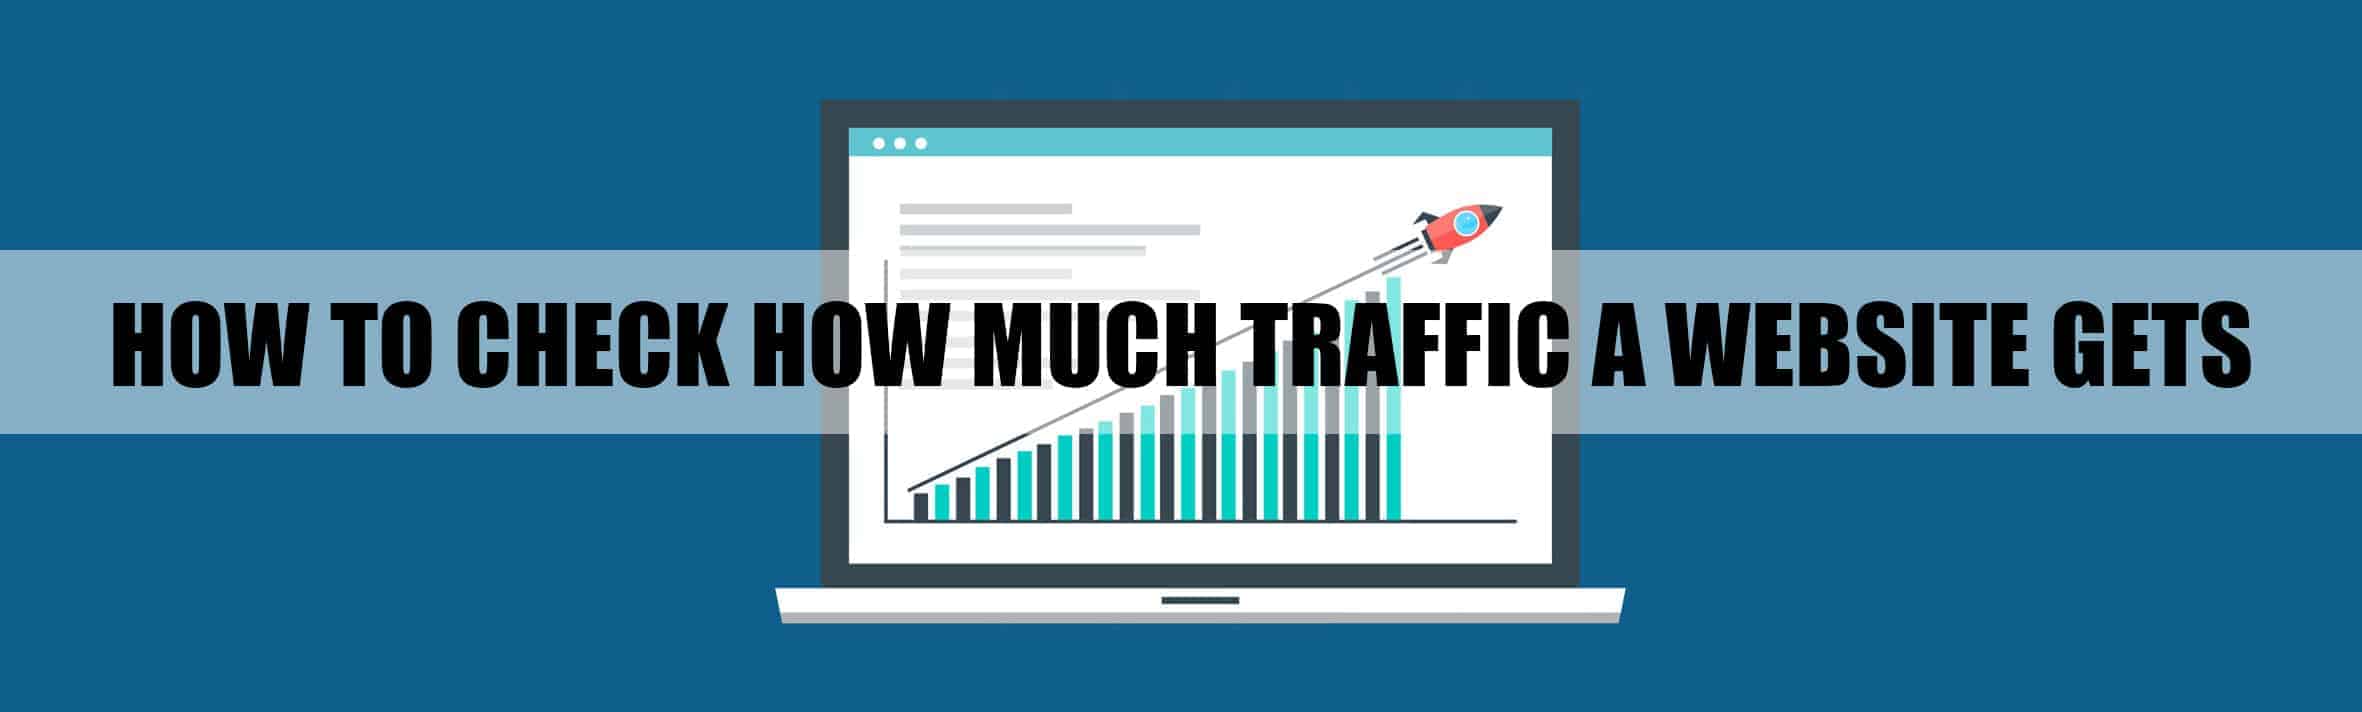 How To Check How Much Traffic Website Gets